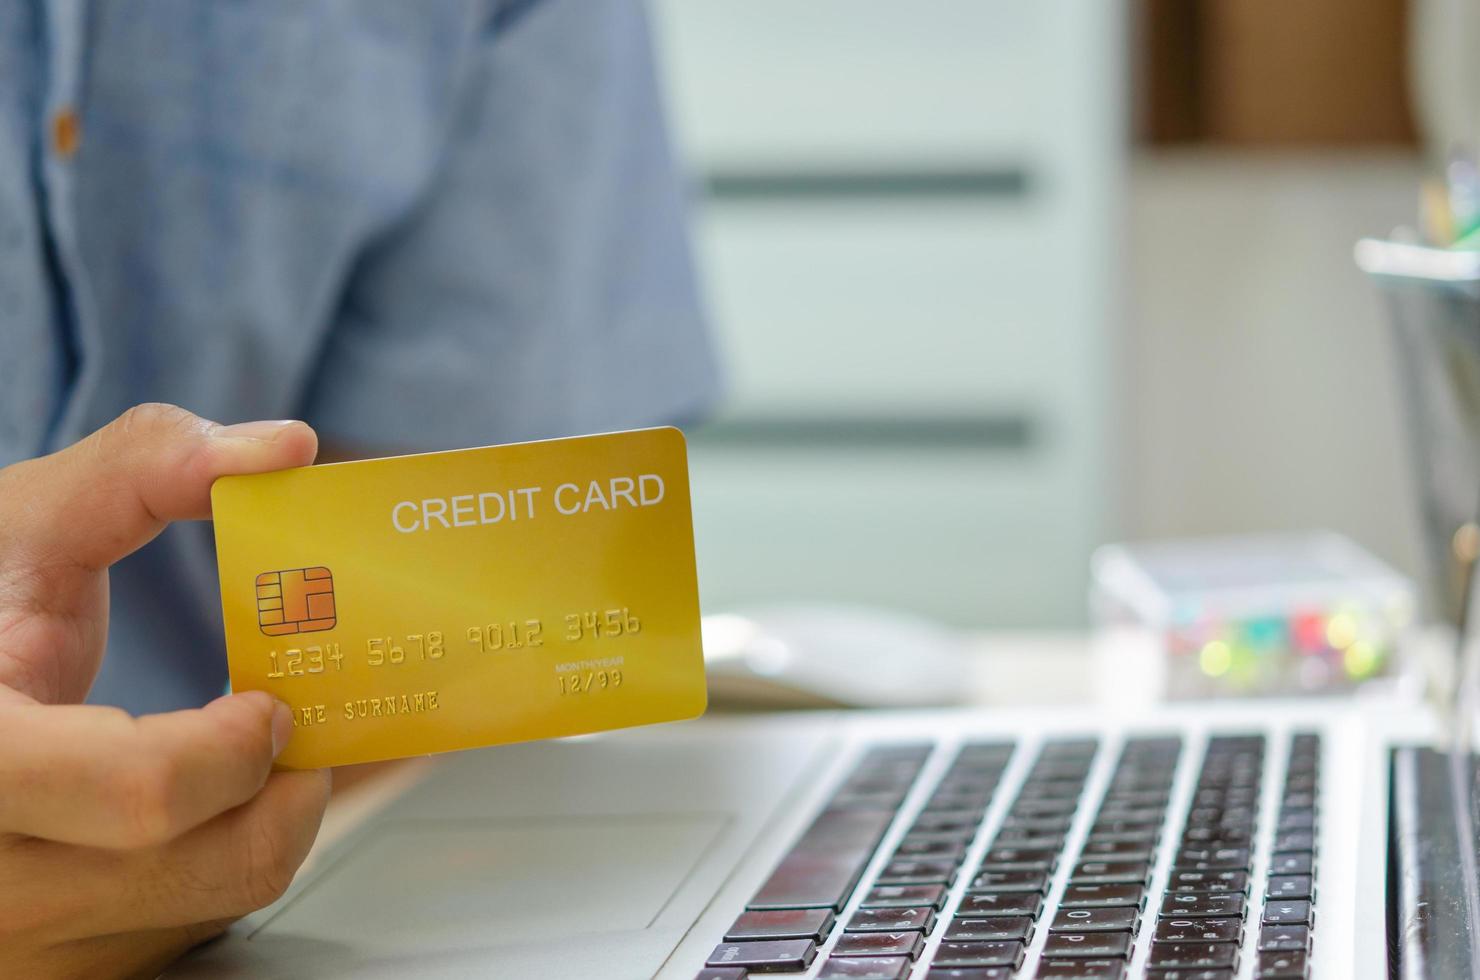 A man's hand holding a credit card for online transactions or shopping online photo